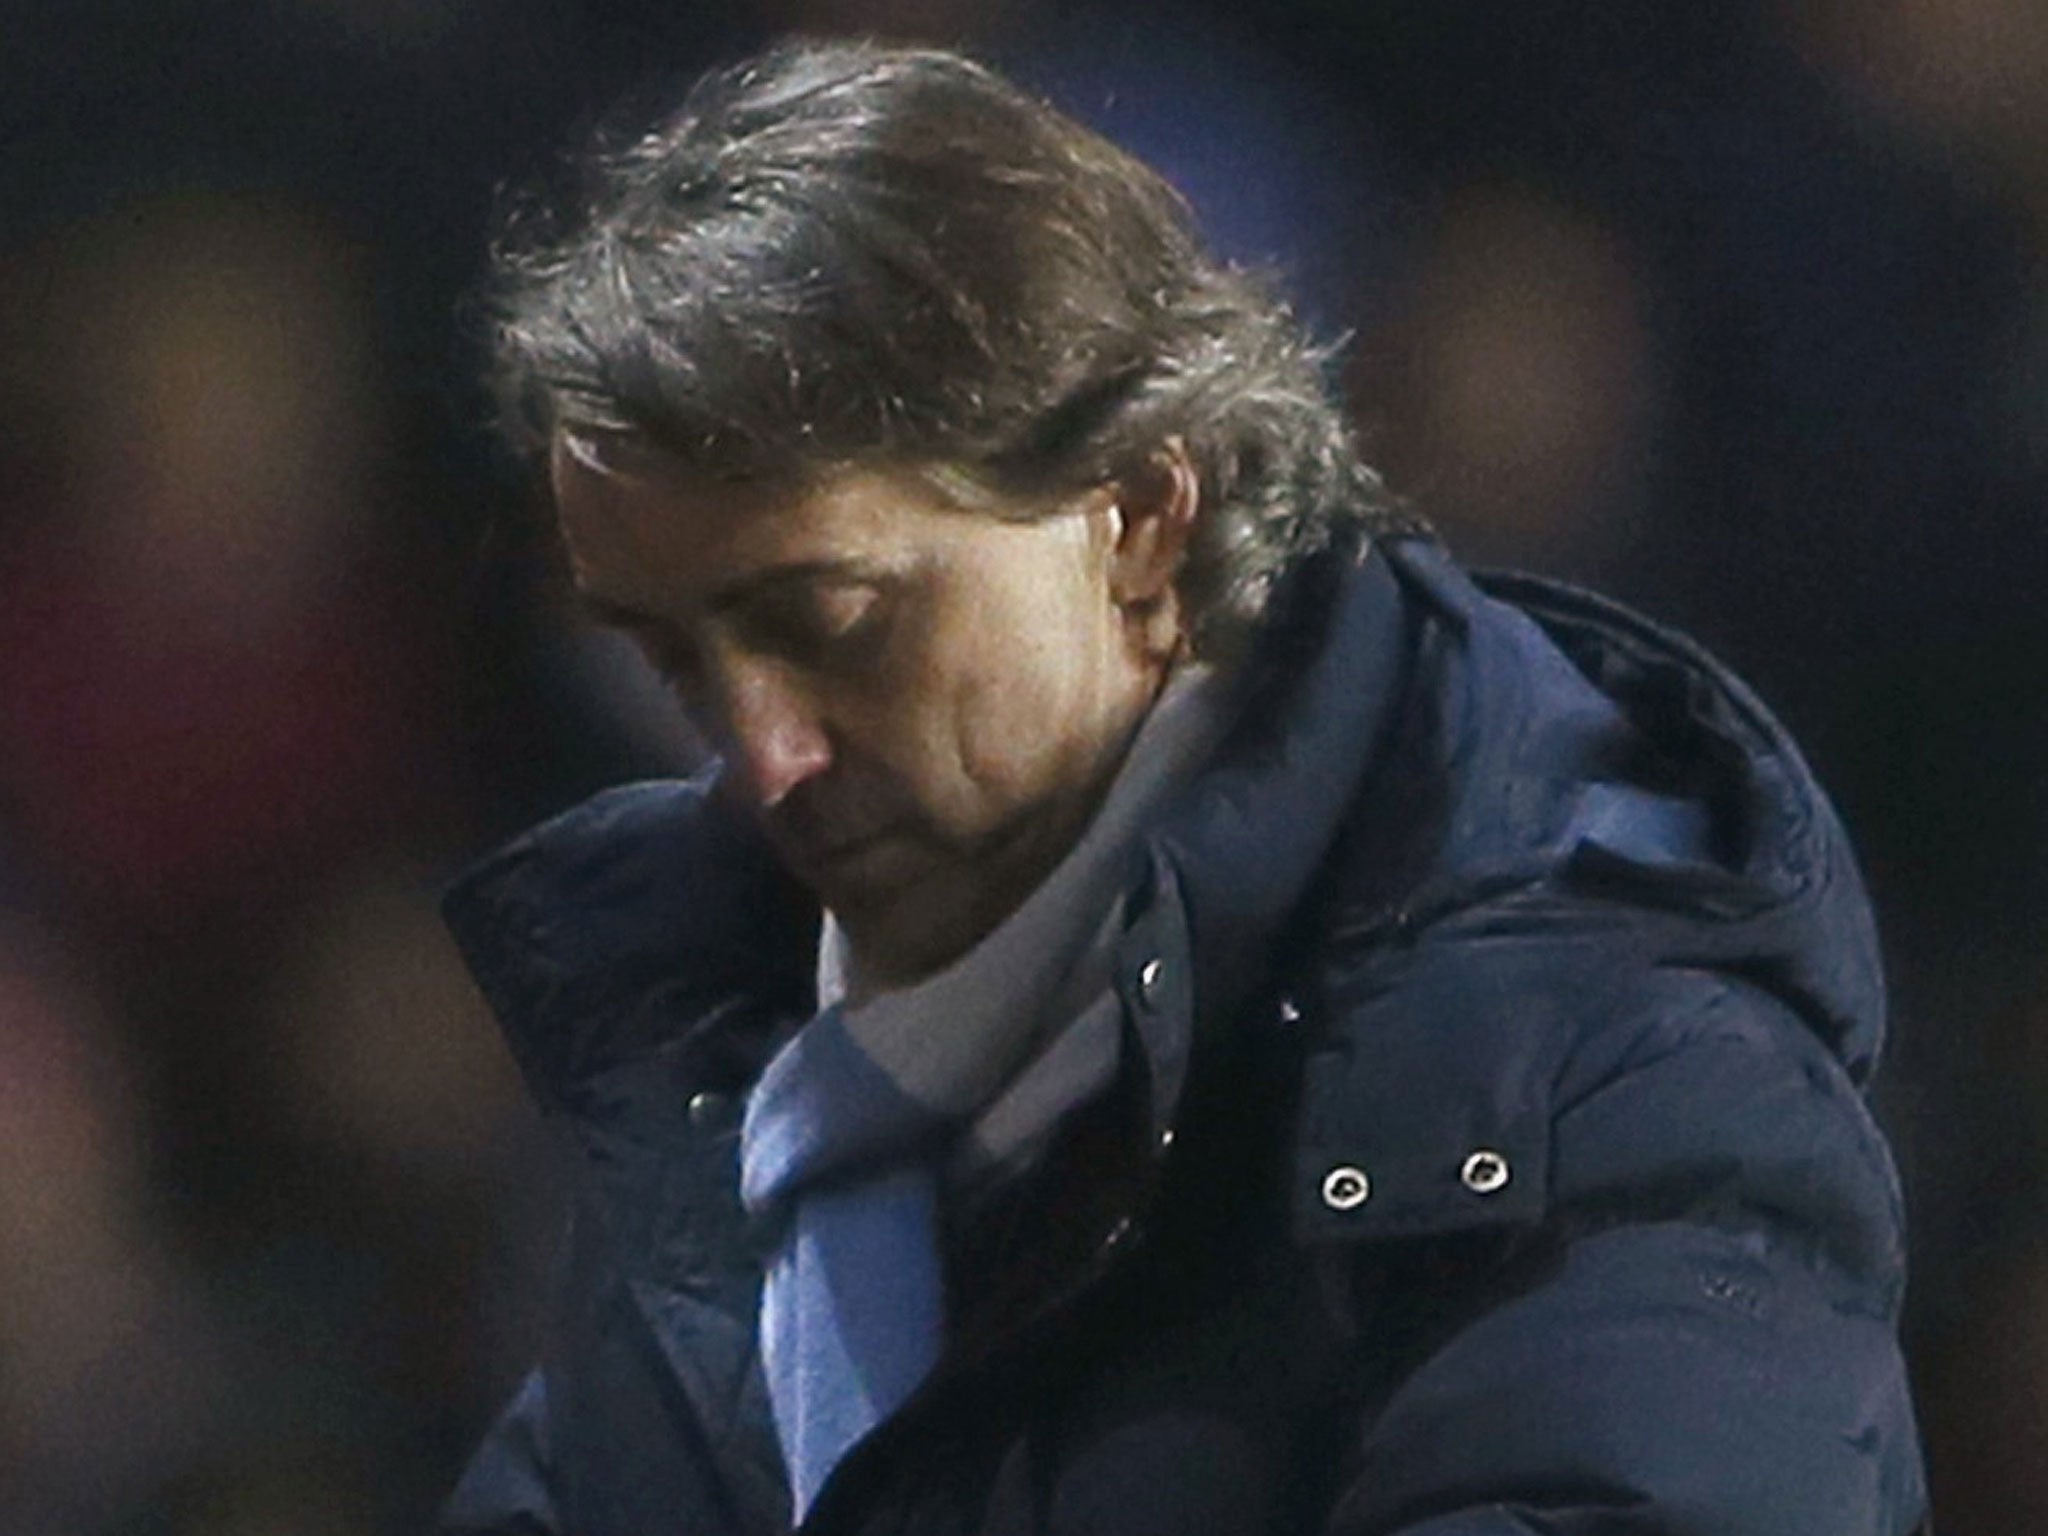 Roberto Mancini admitted that Man City's chances of retaining their title were low and may disappear altogether if Man United win at home to Everton